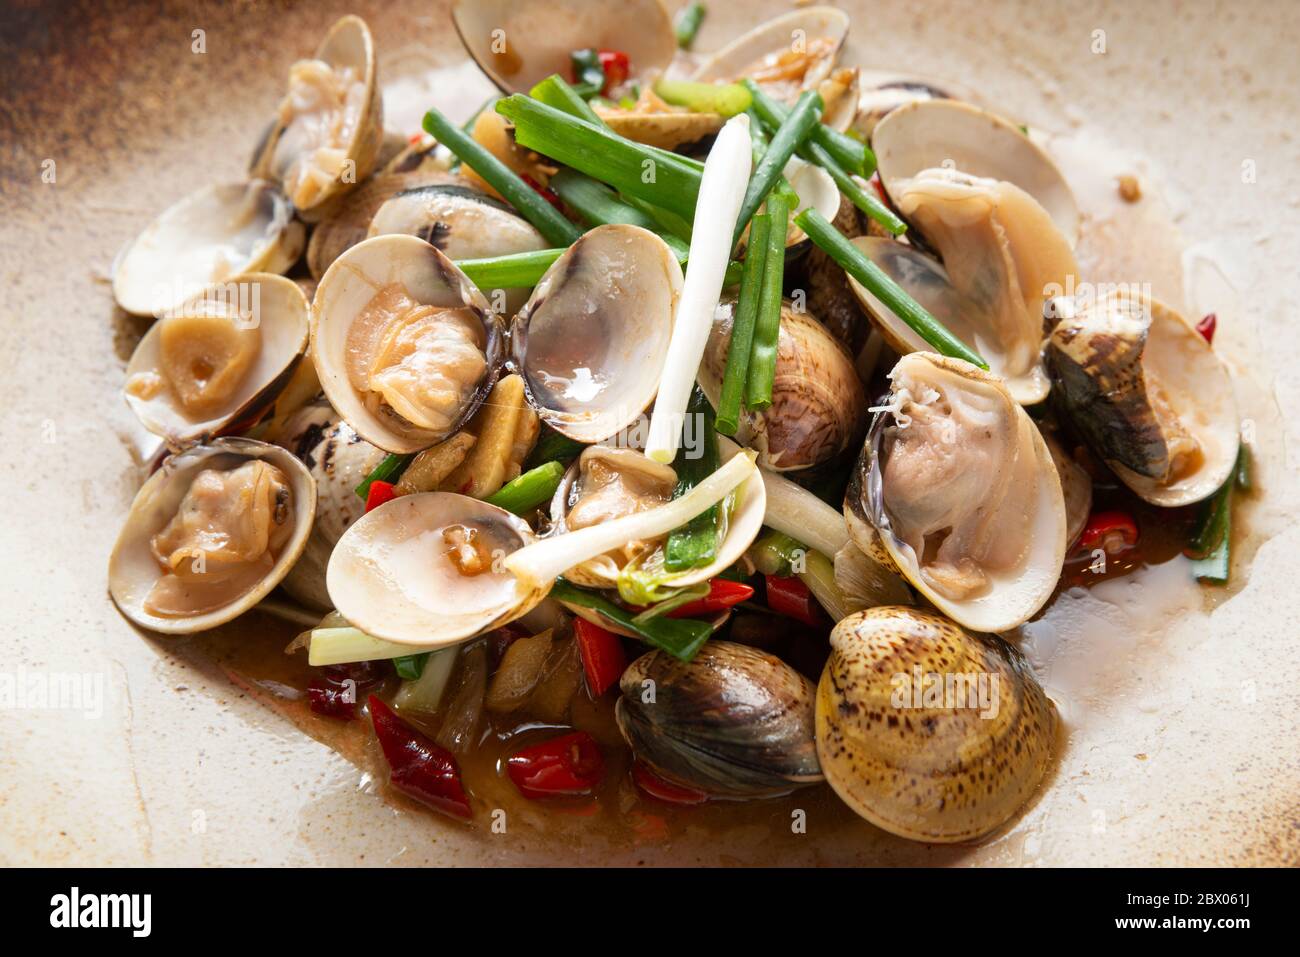 Stir fried clams,Chinese food Stock Photo